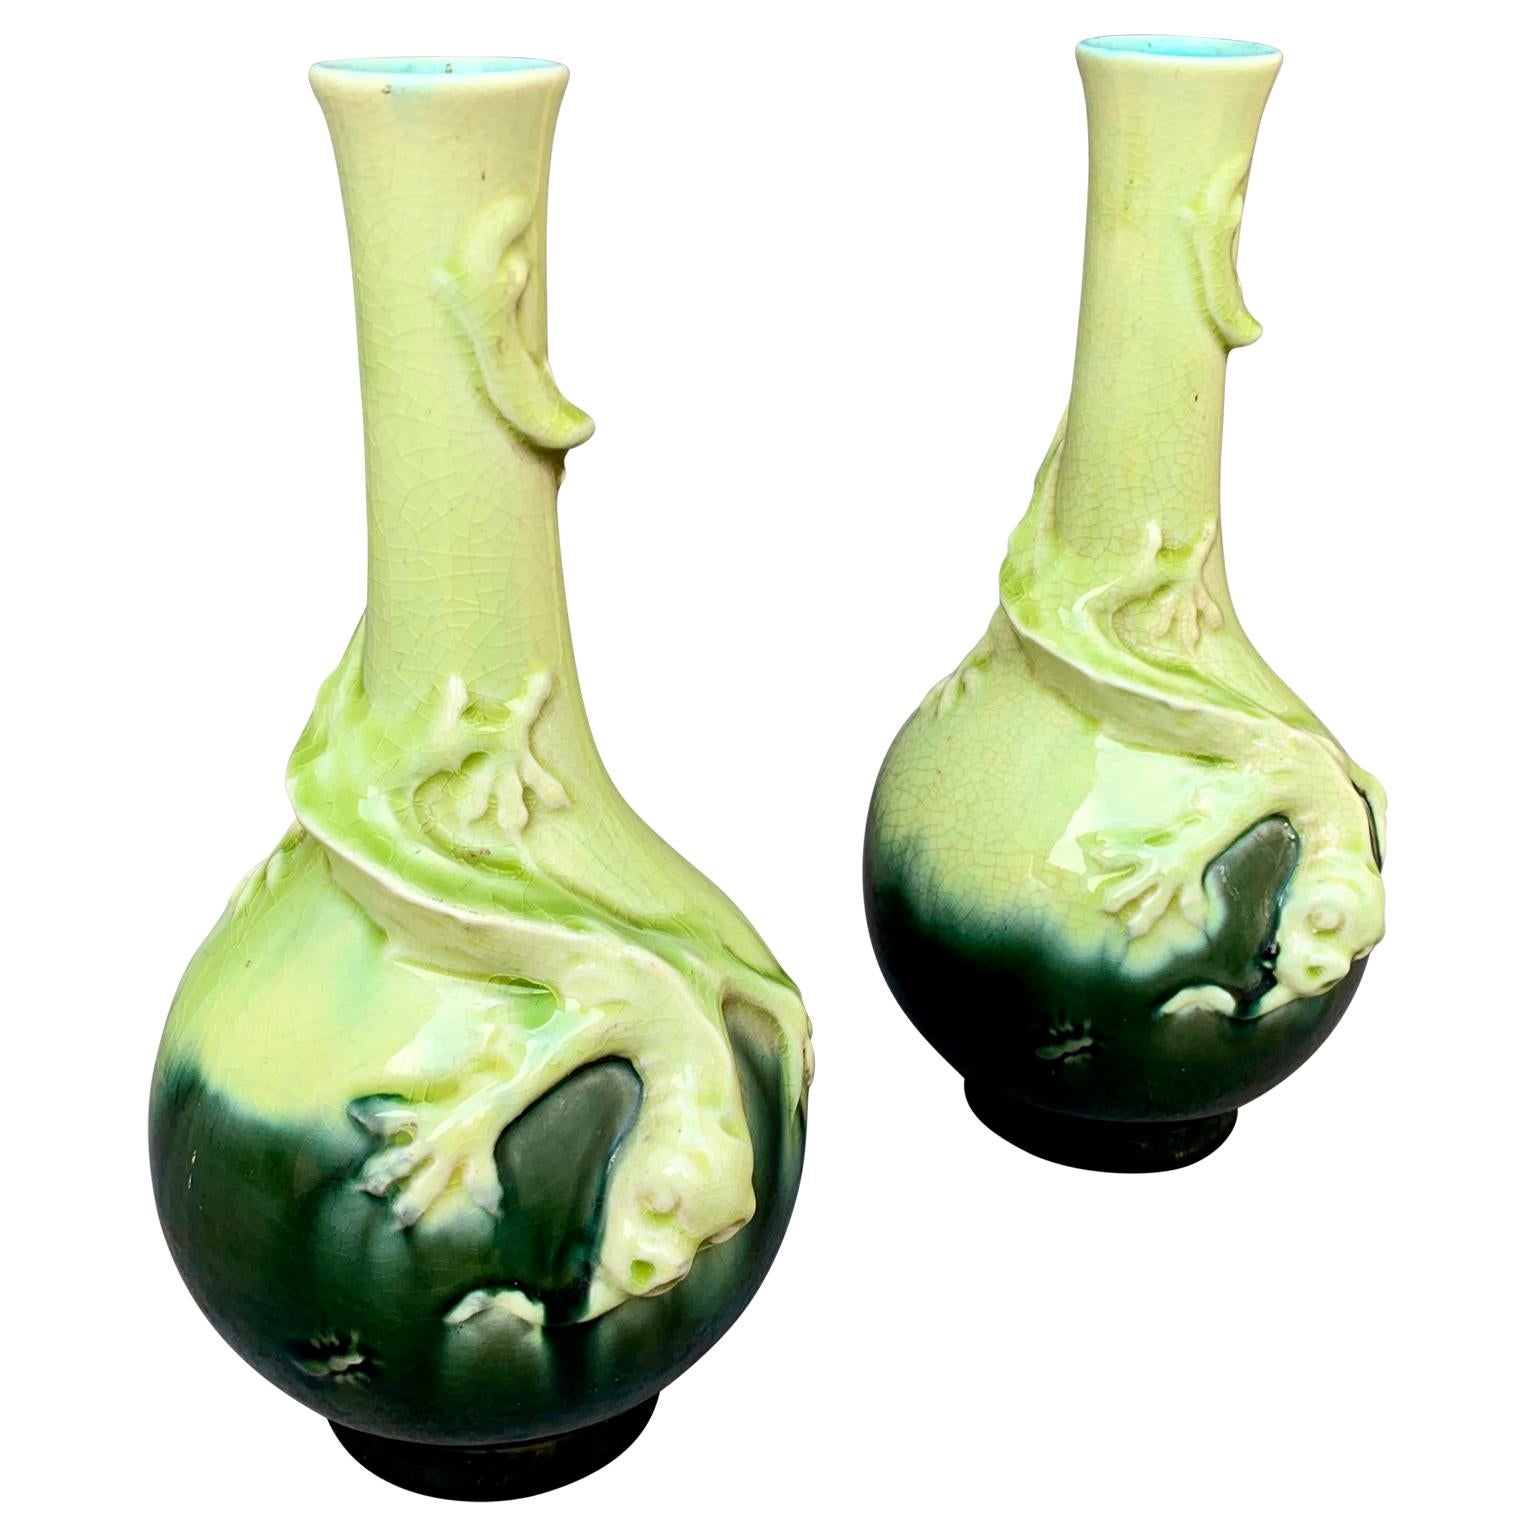  19th Century Pair of Swedish Art Nouveau Majolica Vases  In Good Condition For Sale In Haddonfield, NJ